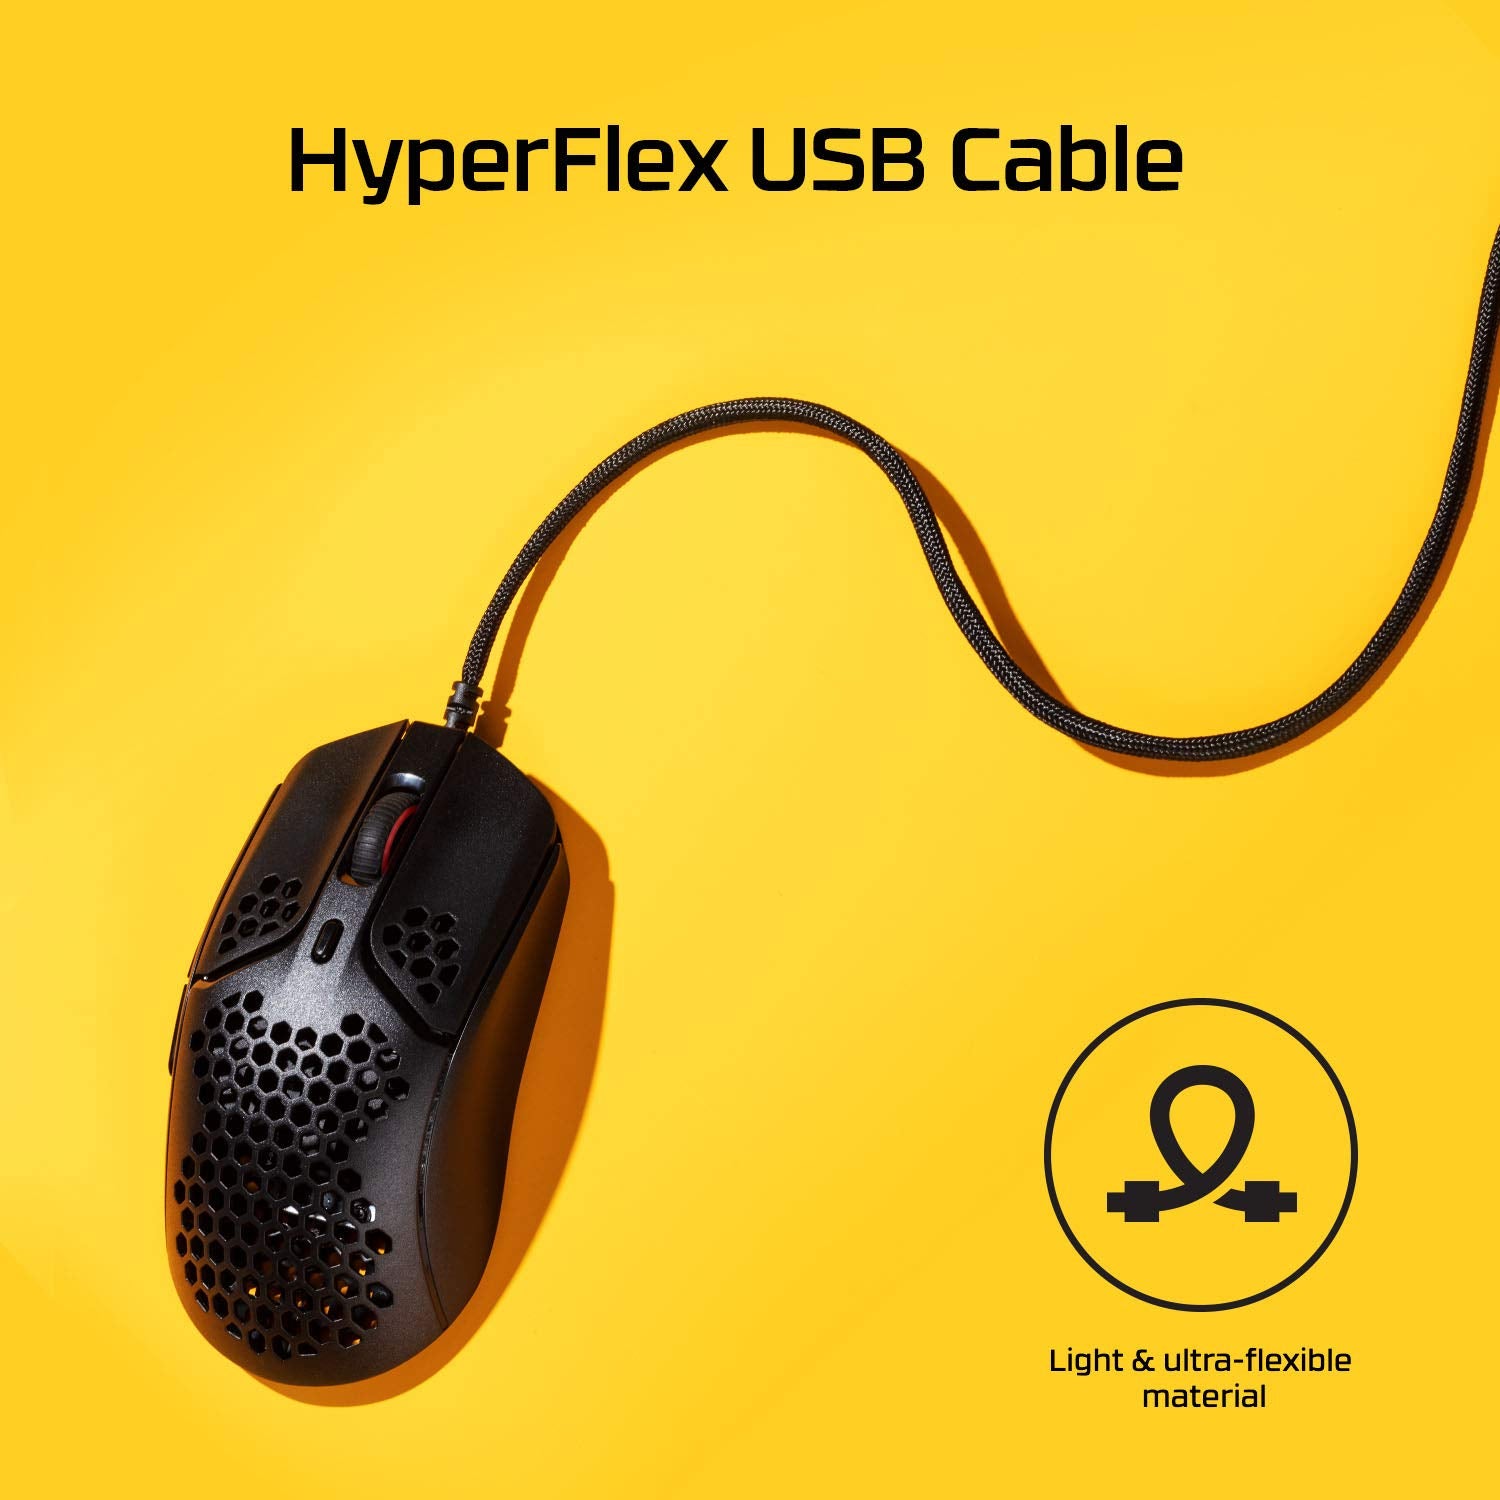 HyperX Pulsefire Haste – Gaming Mouse – Ultra-Lightweight, 59g, Honeycomb Shell, Hex Design, HyperFlex Cable, Up to 16000 DPI, 6 Programmable Buttons